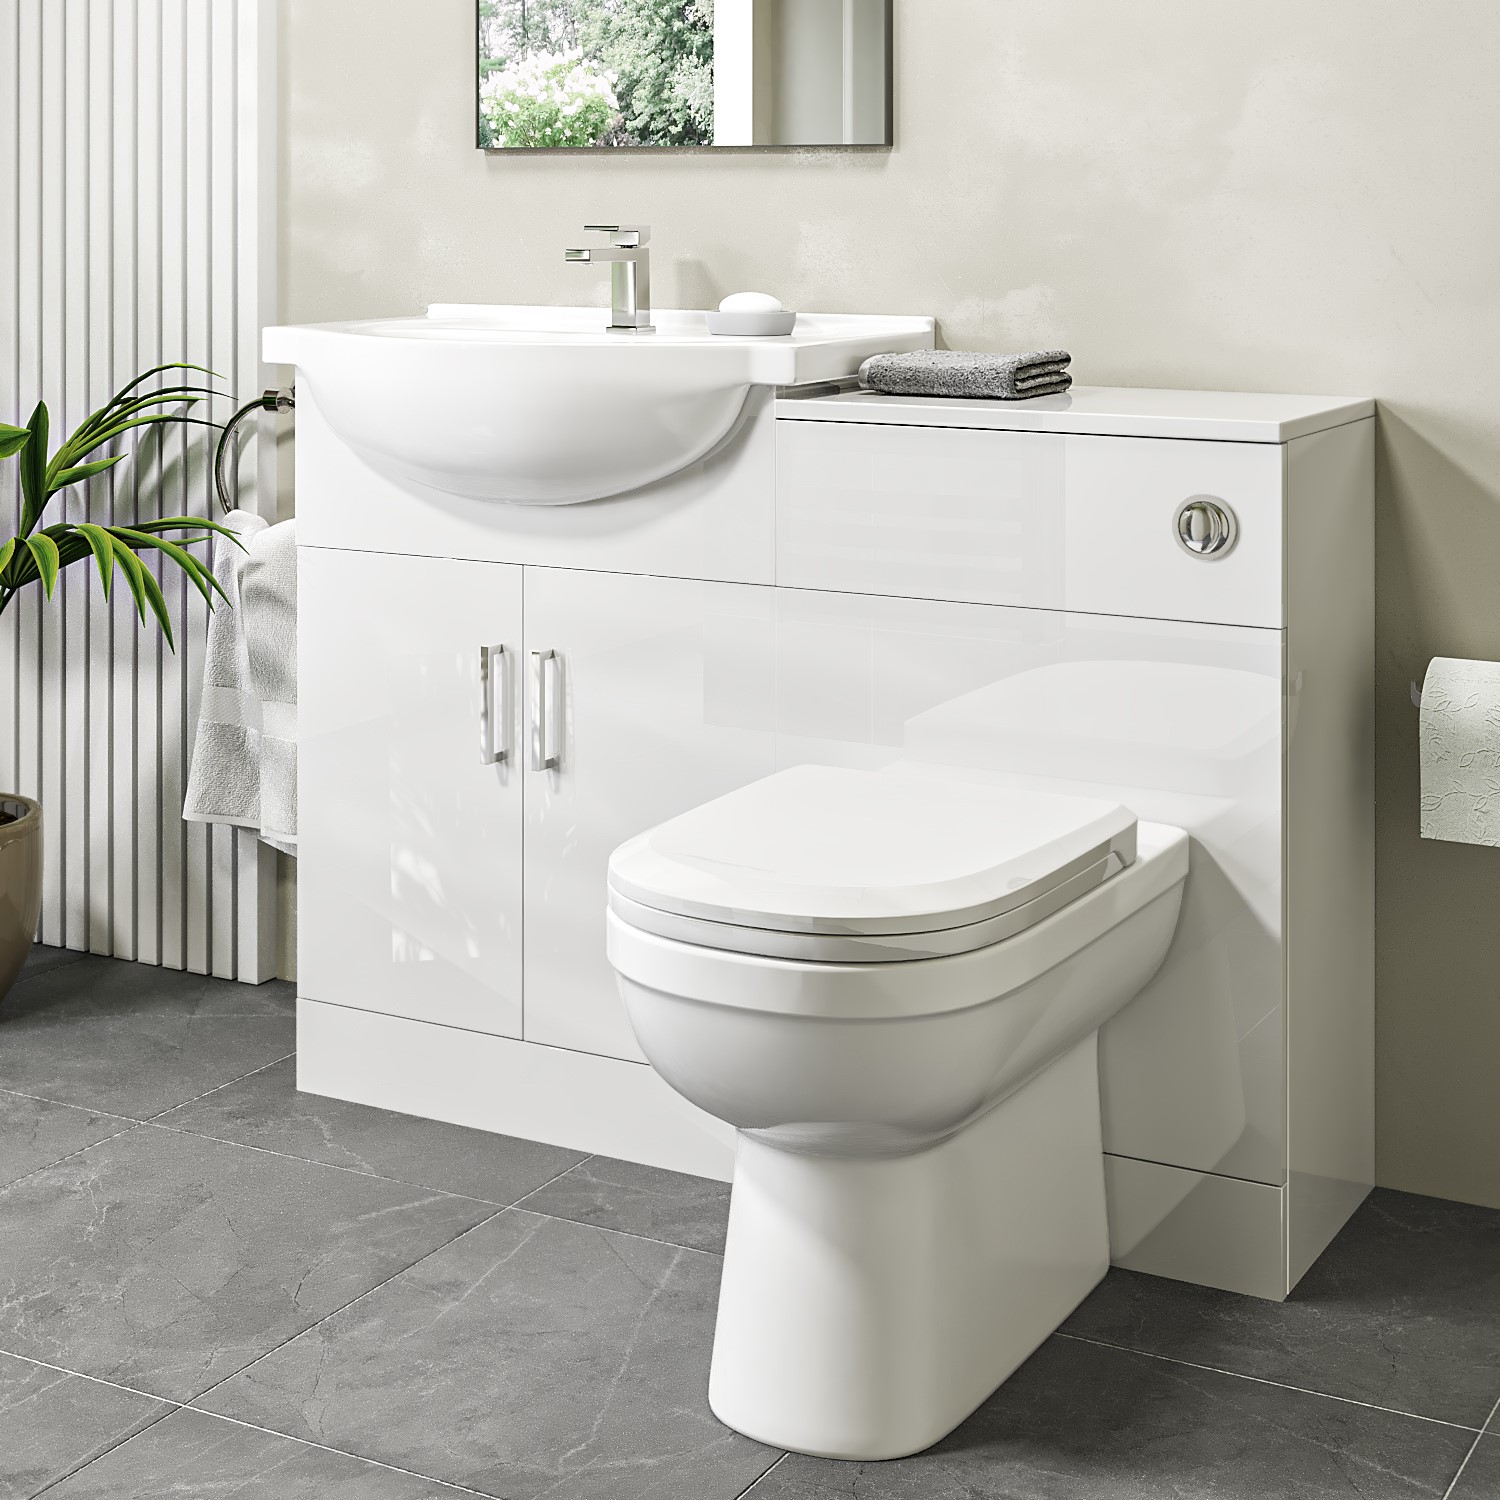 1100mm White Toilet and Sink Unit with Round Toilet - Classic